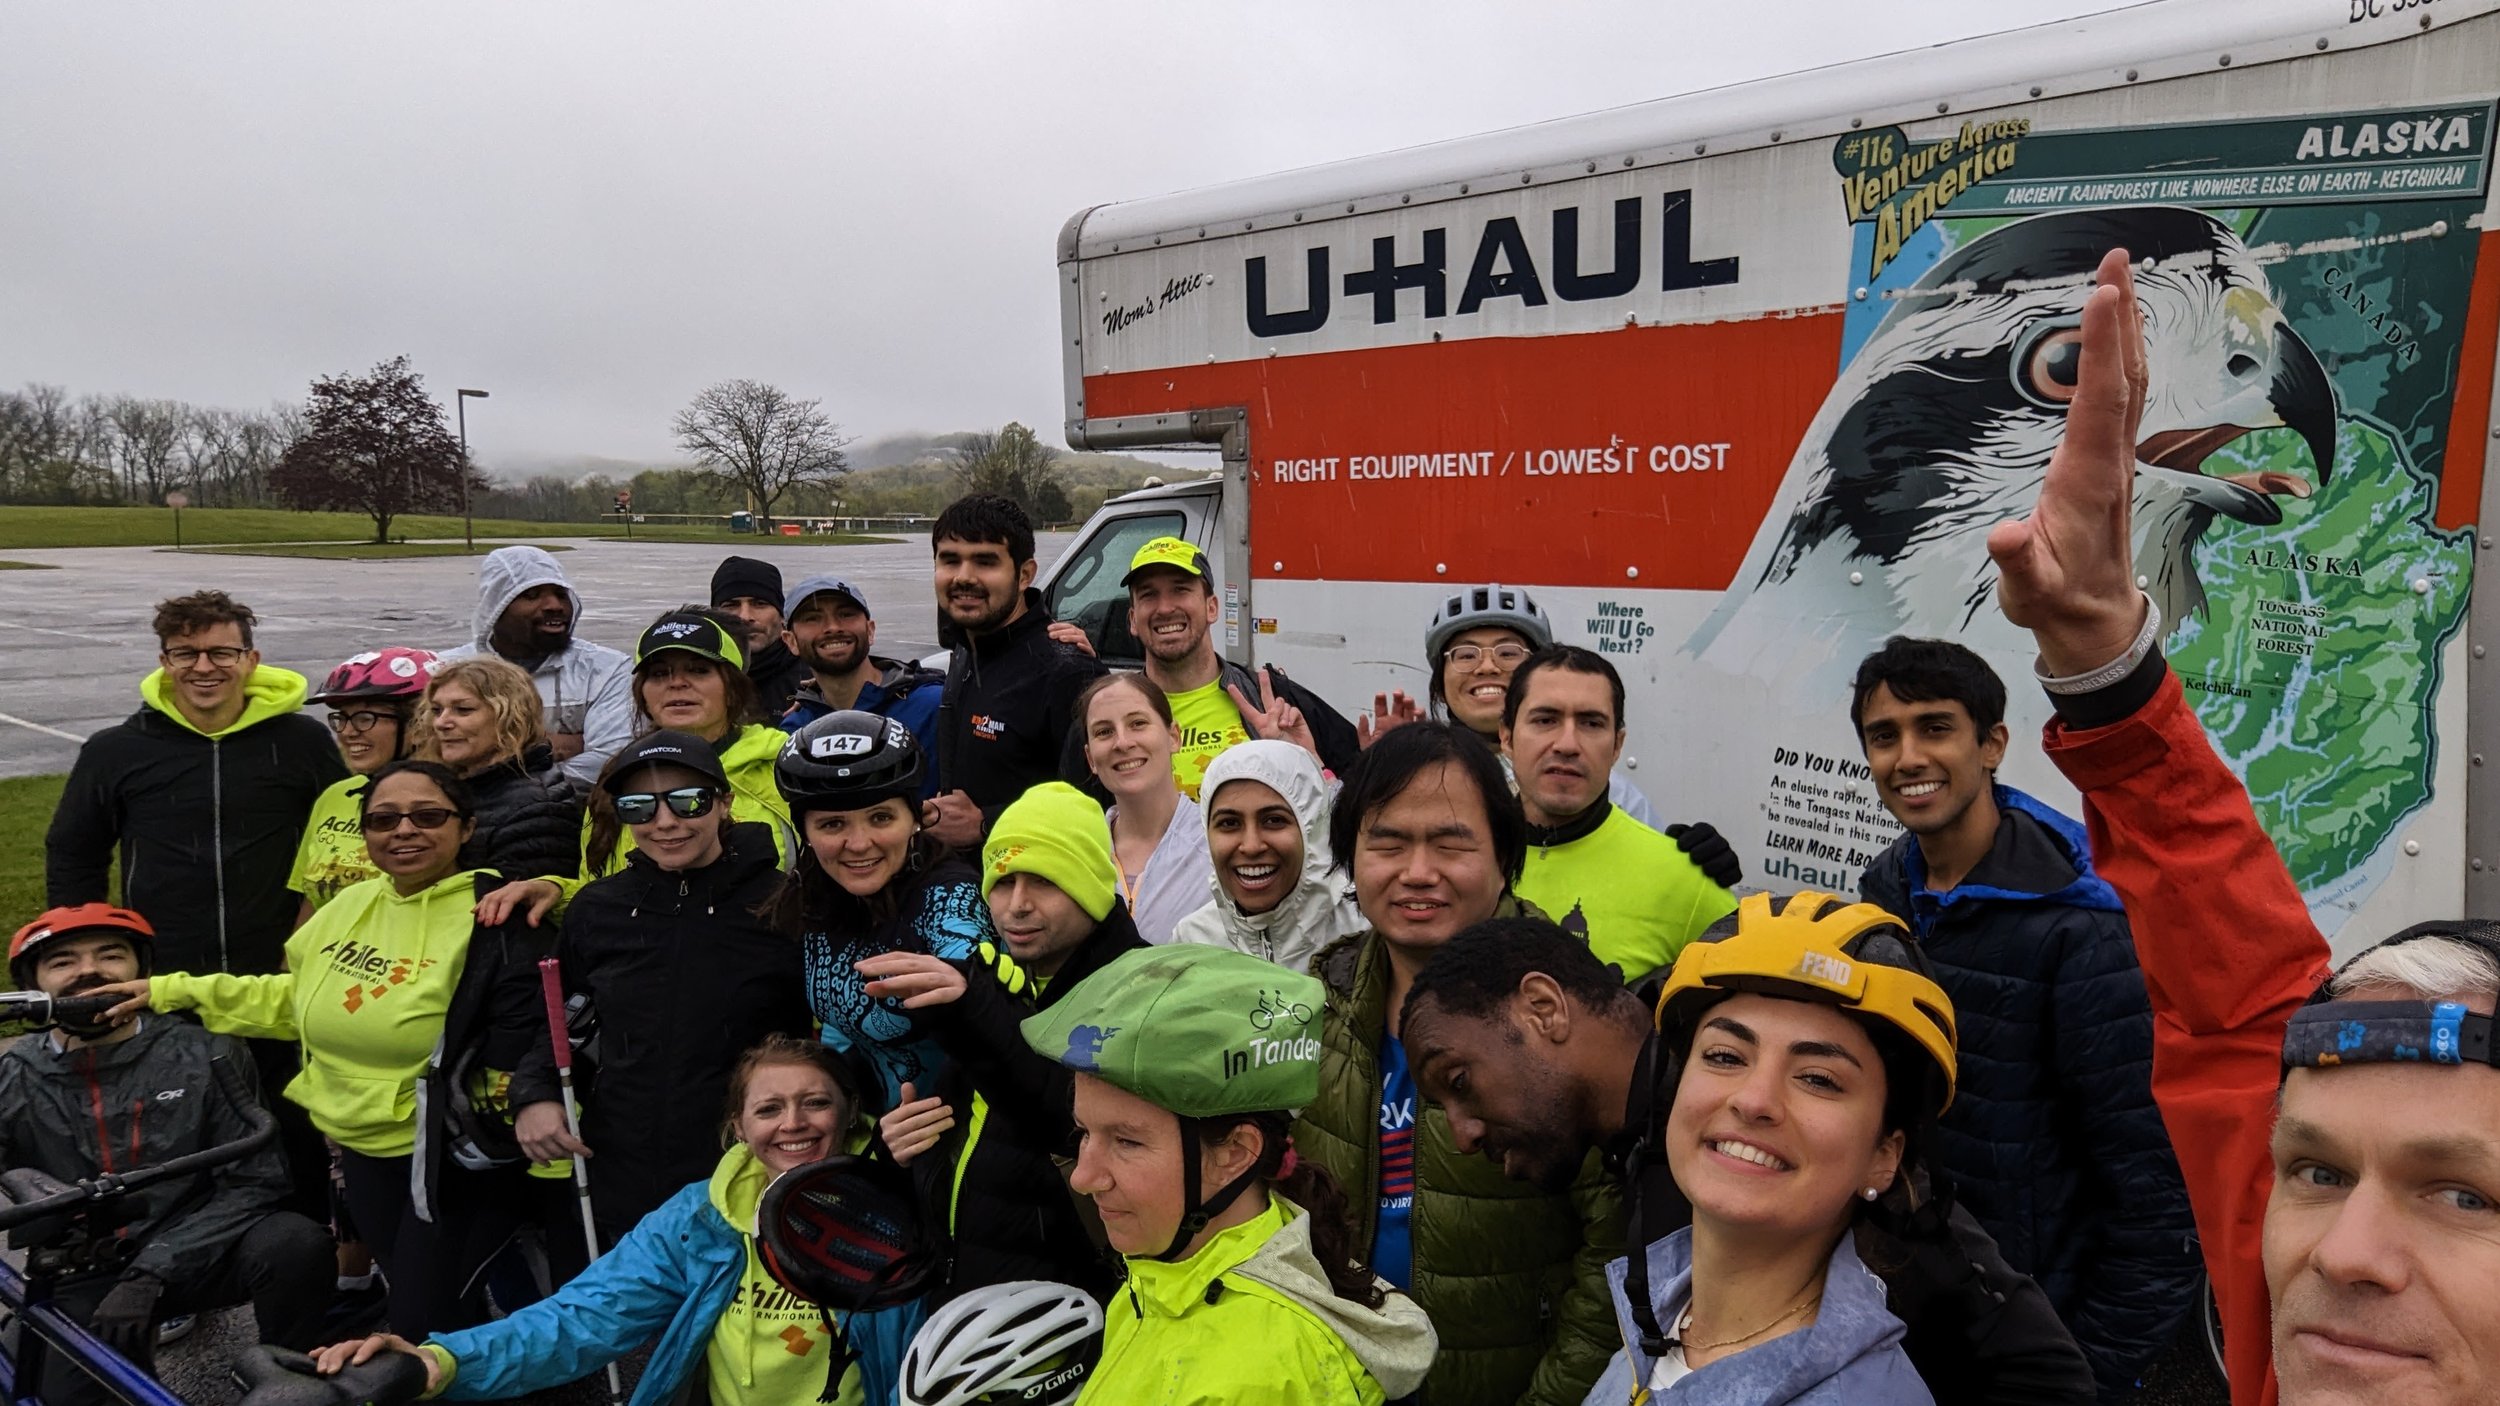  Group photo of Achilles members posing together in front of a U-Haul truck 